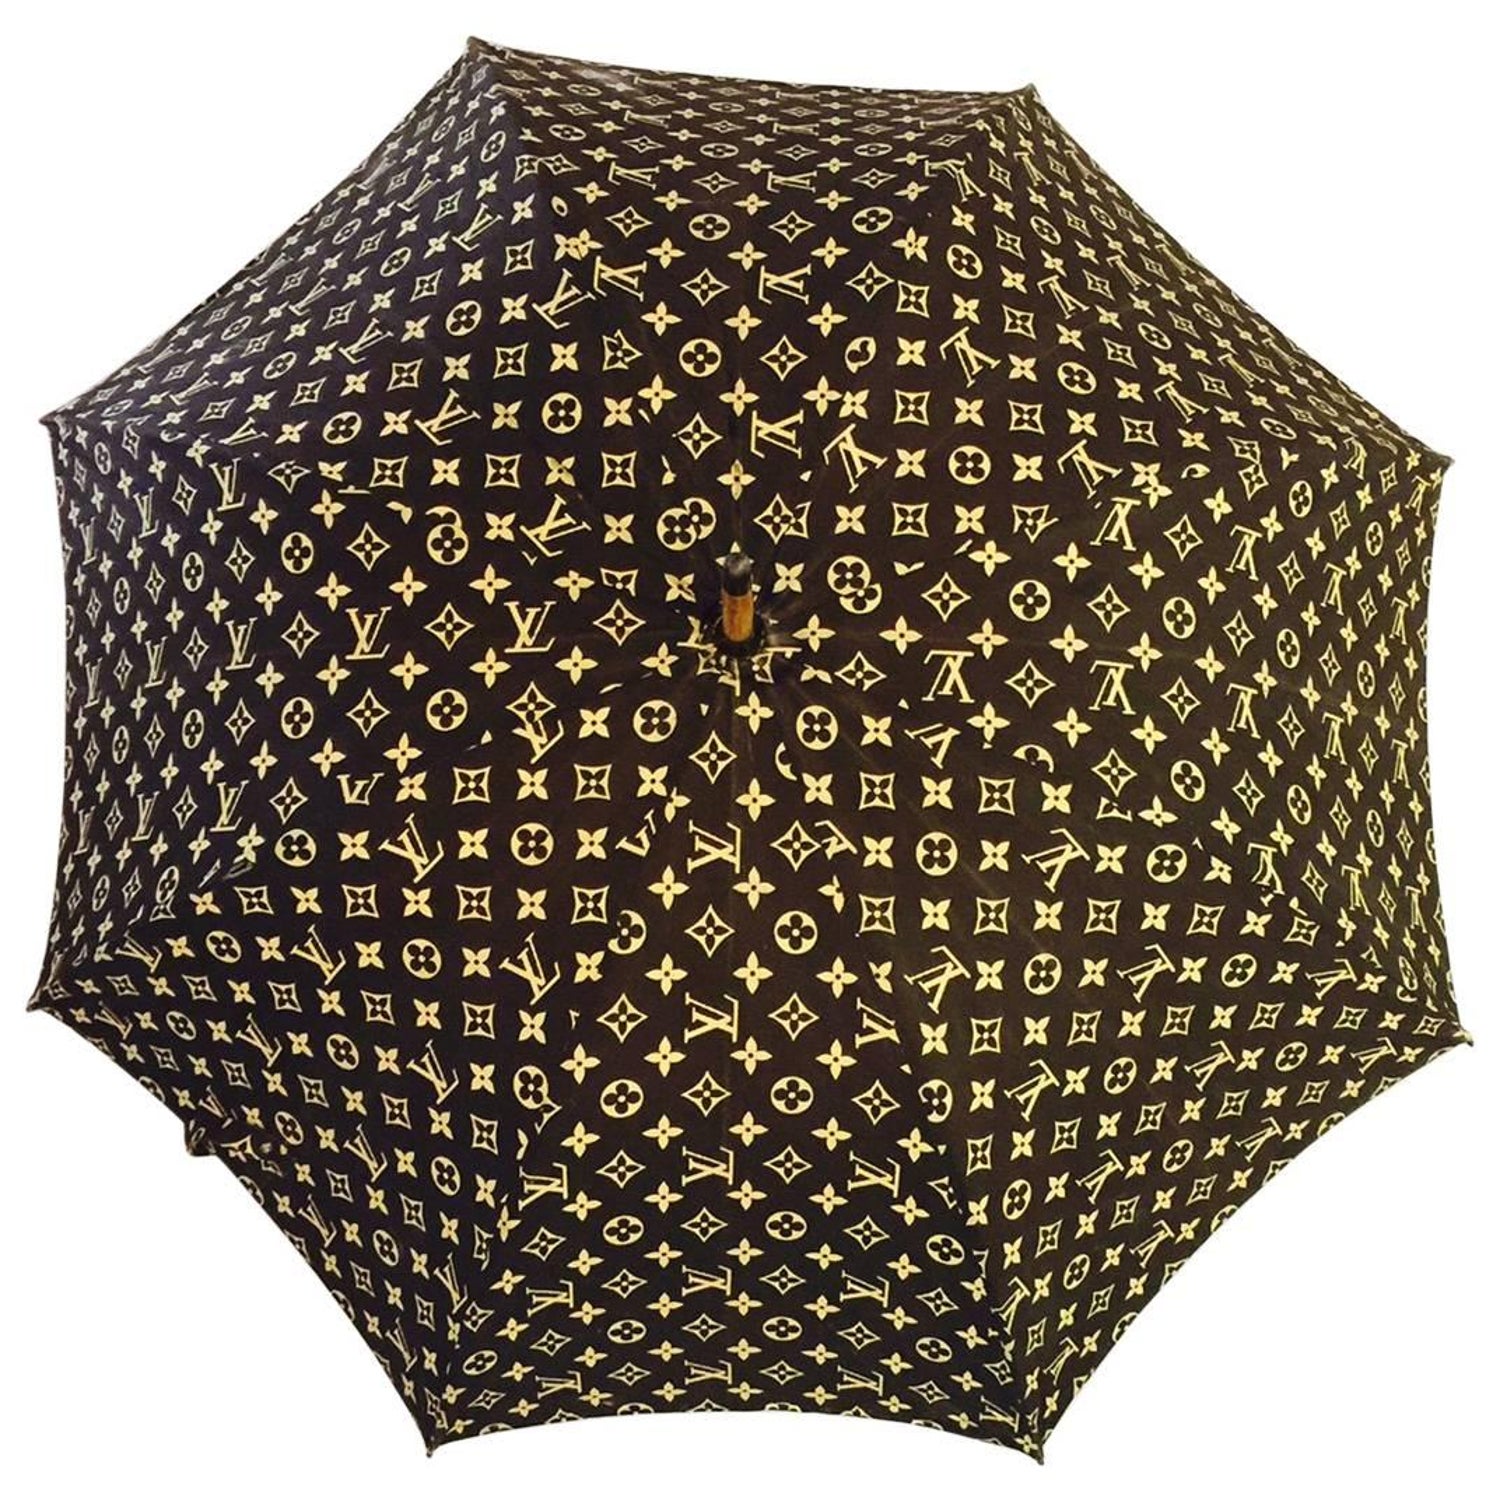 Vintage 1960's Louis Vuitton Umbrella Made In France for Sale in